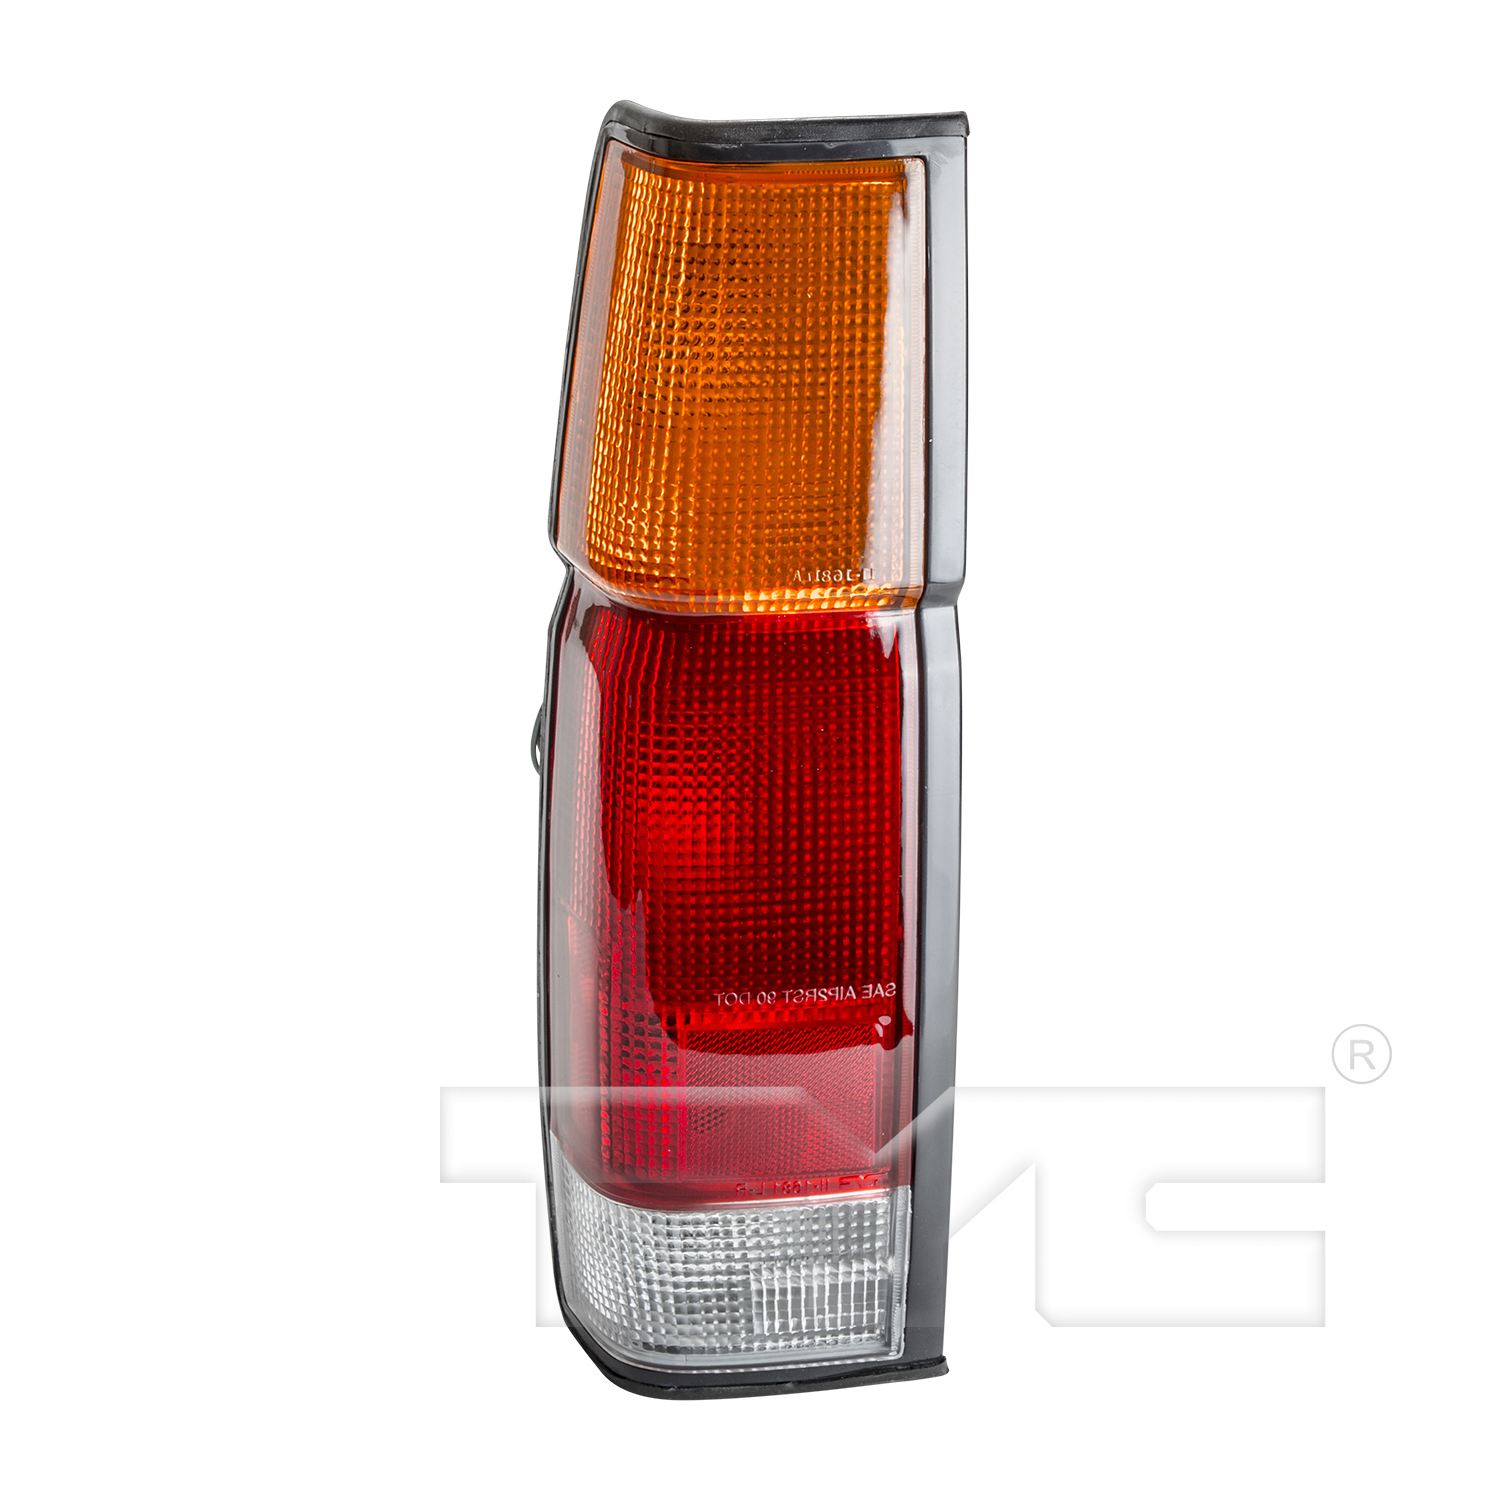 Aftermarket TAILLIGHTS for NISSAN - D21, D21,86-94,LT Taillamp assy